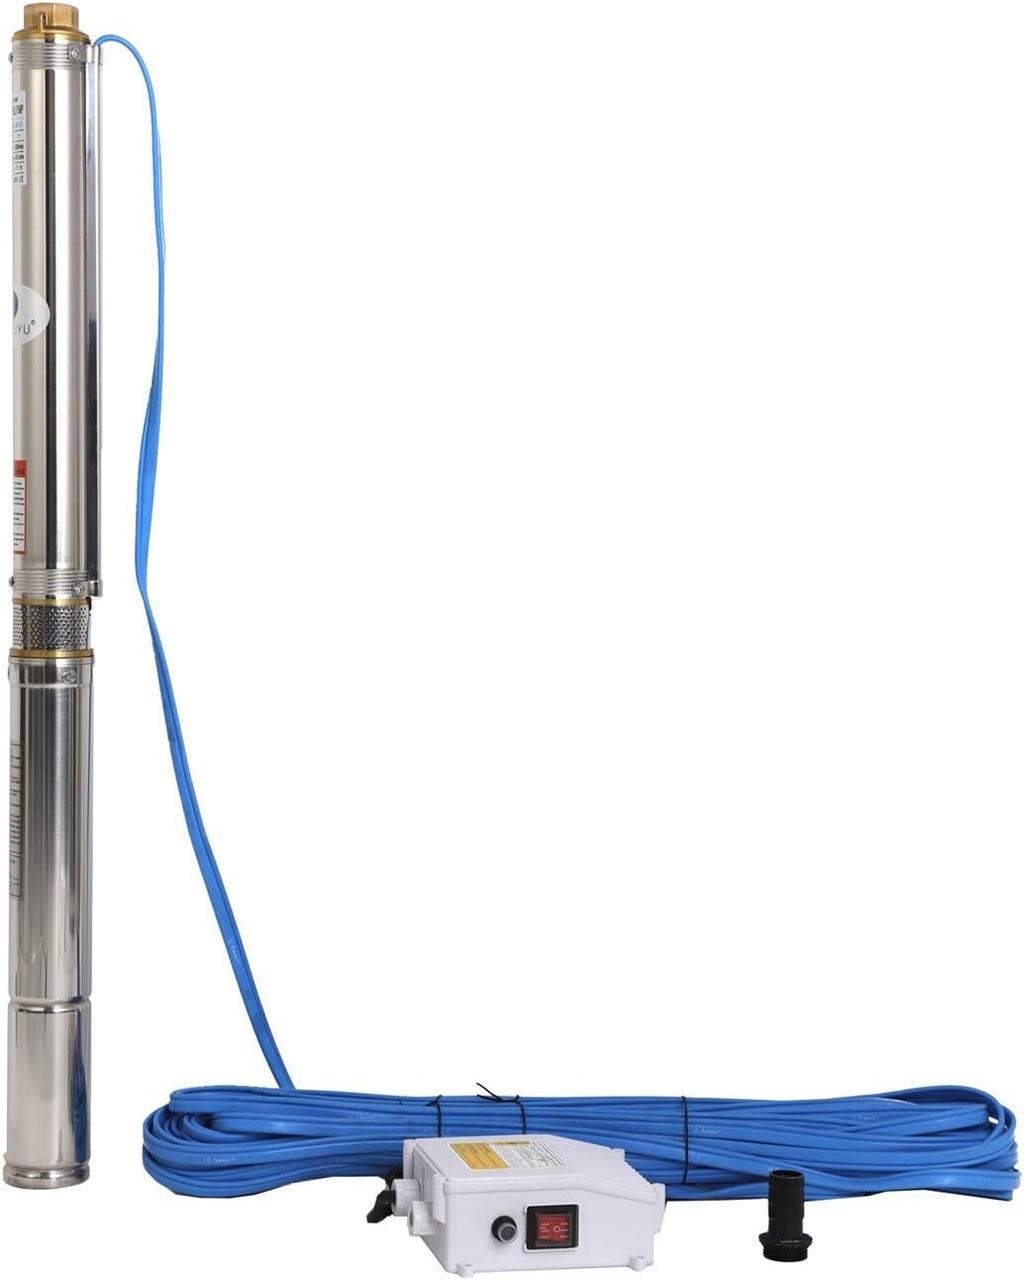 2.5 OD Submersible Pump  110V  0.33HP  Steel